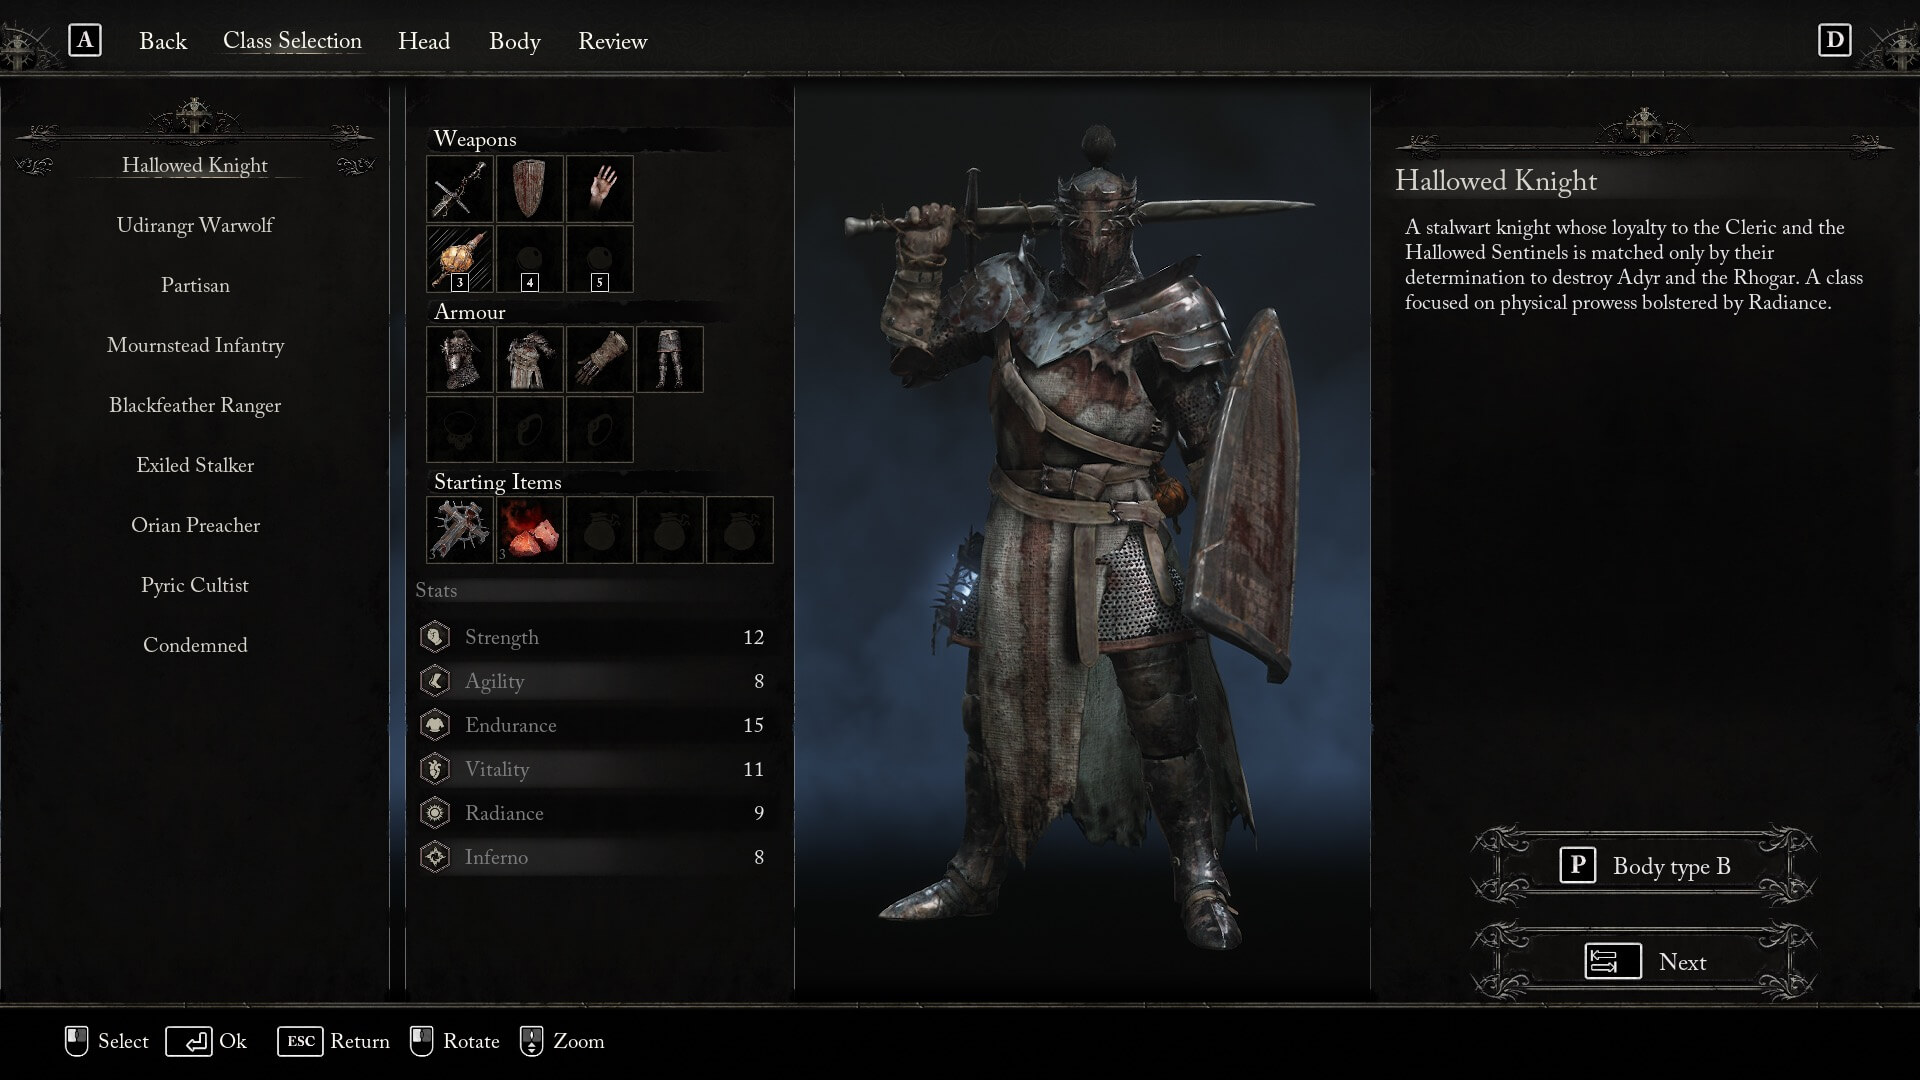 Lords of the Fallen Hallowed Knight Class